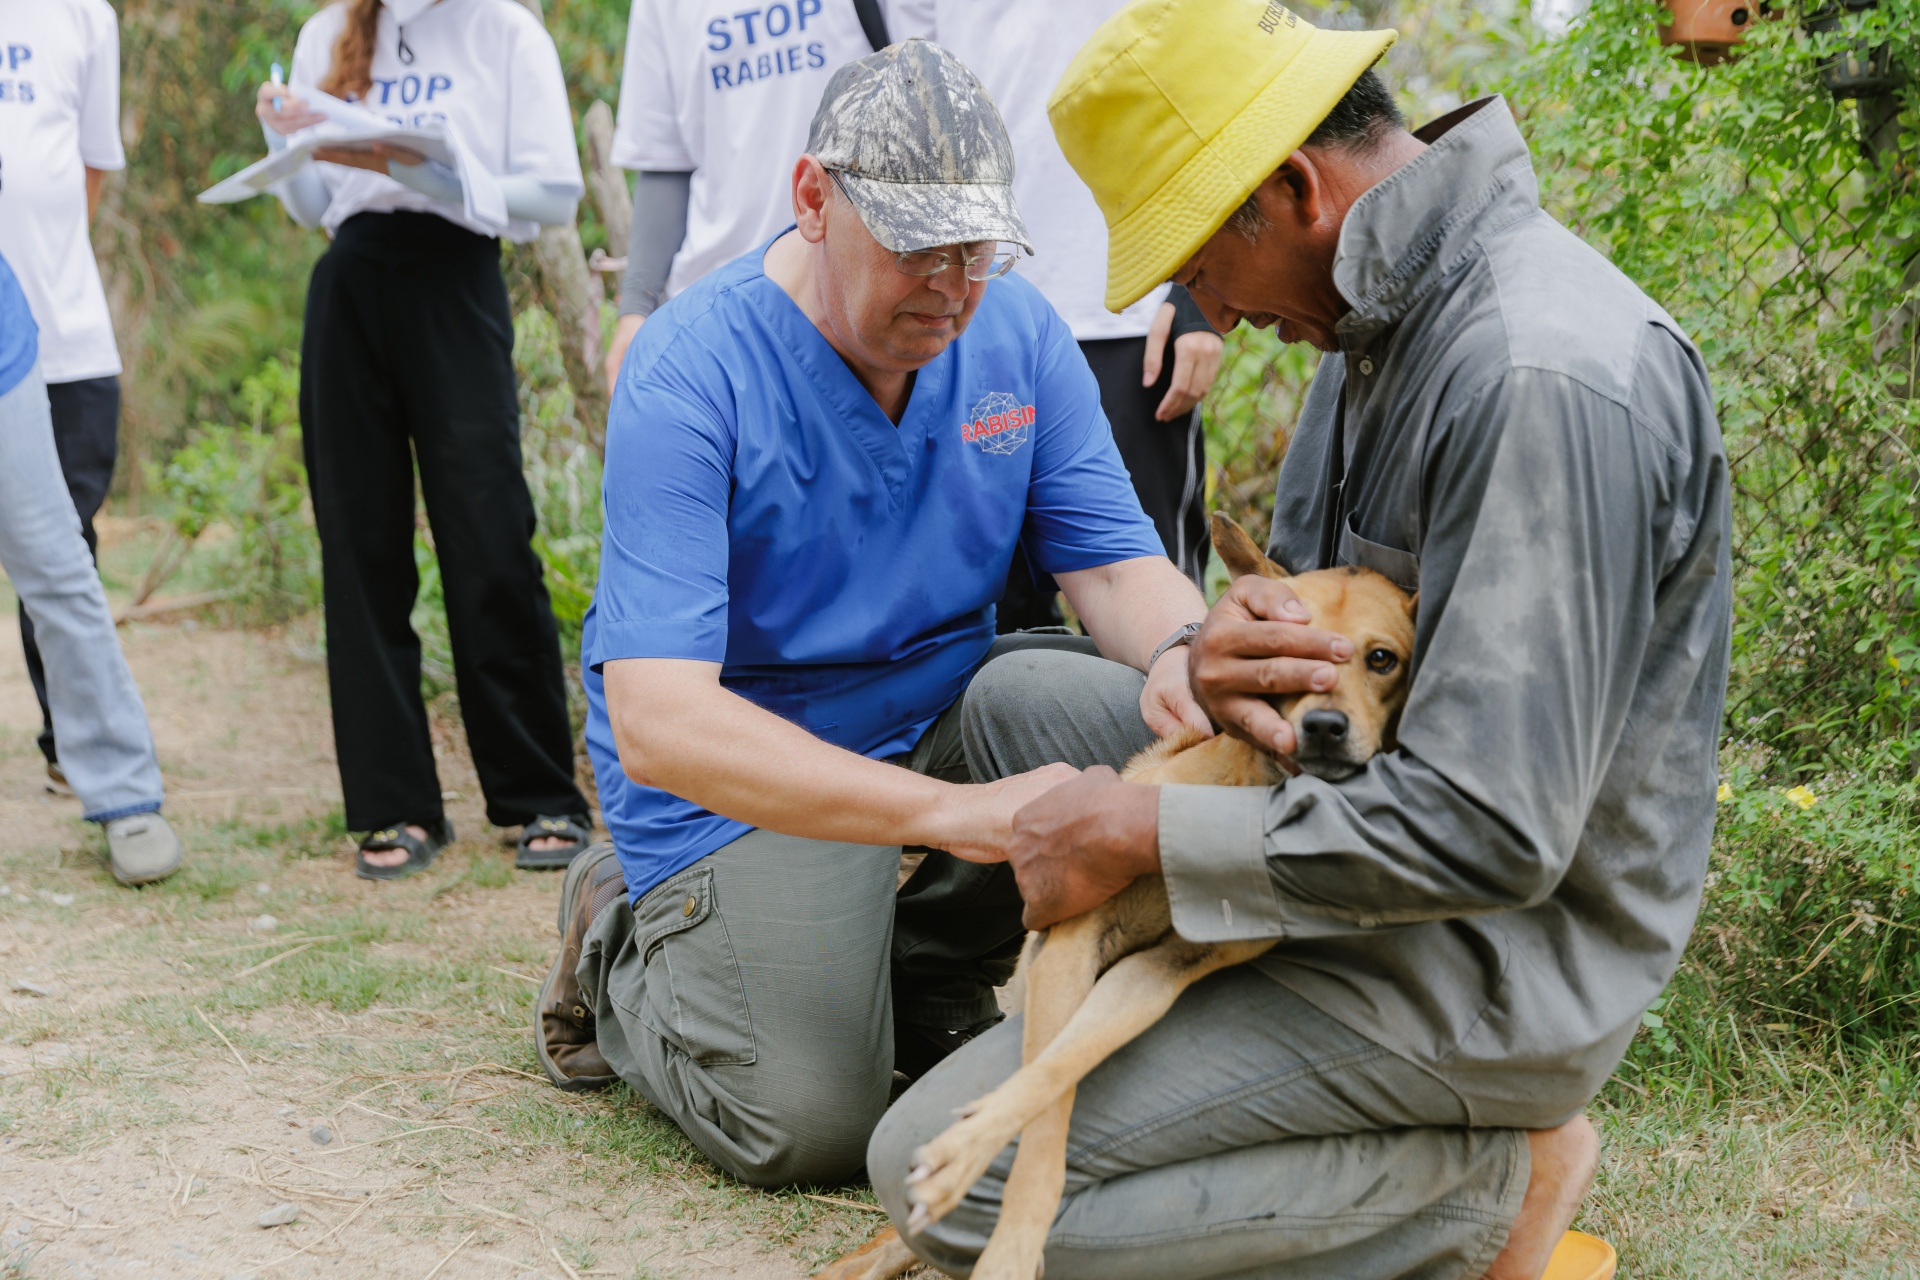 Low vaccination rates and dog smuggling aiding transmission in Vietnam